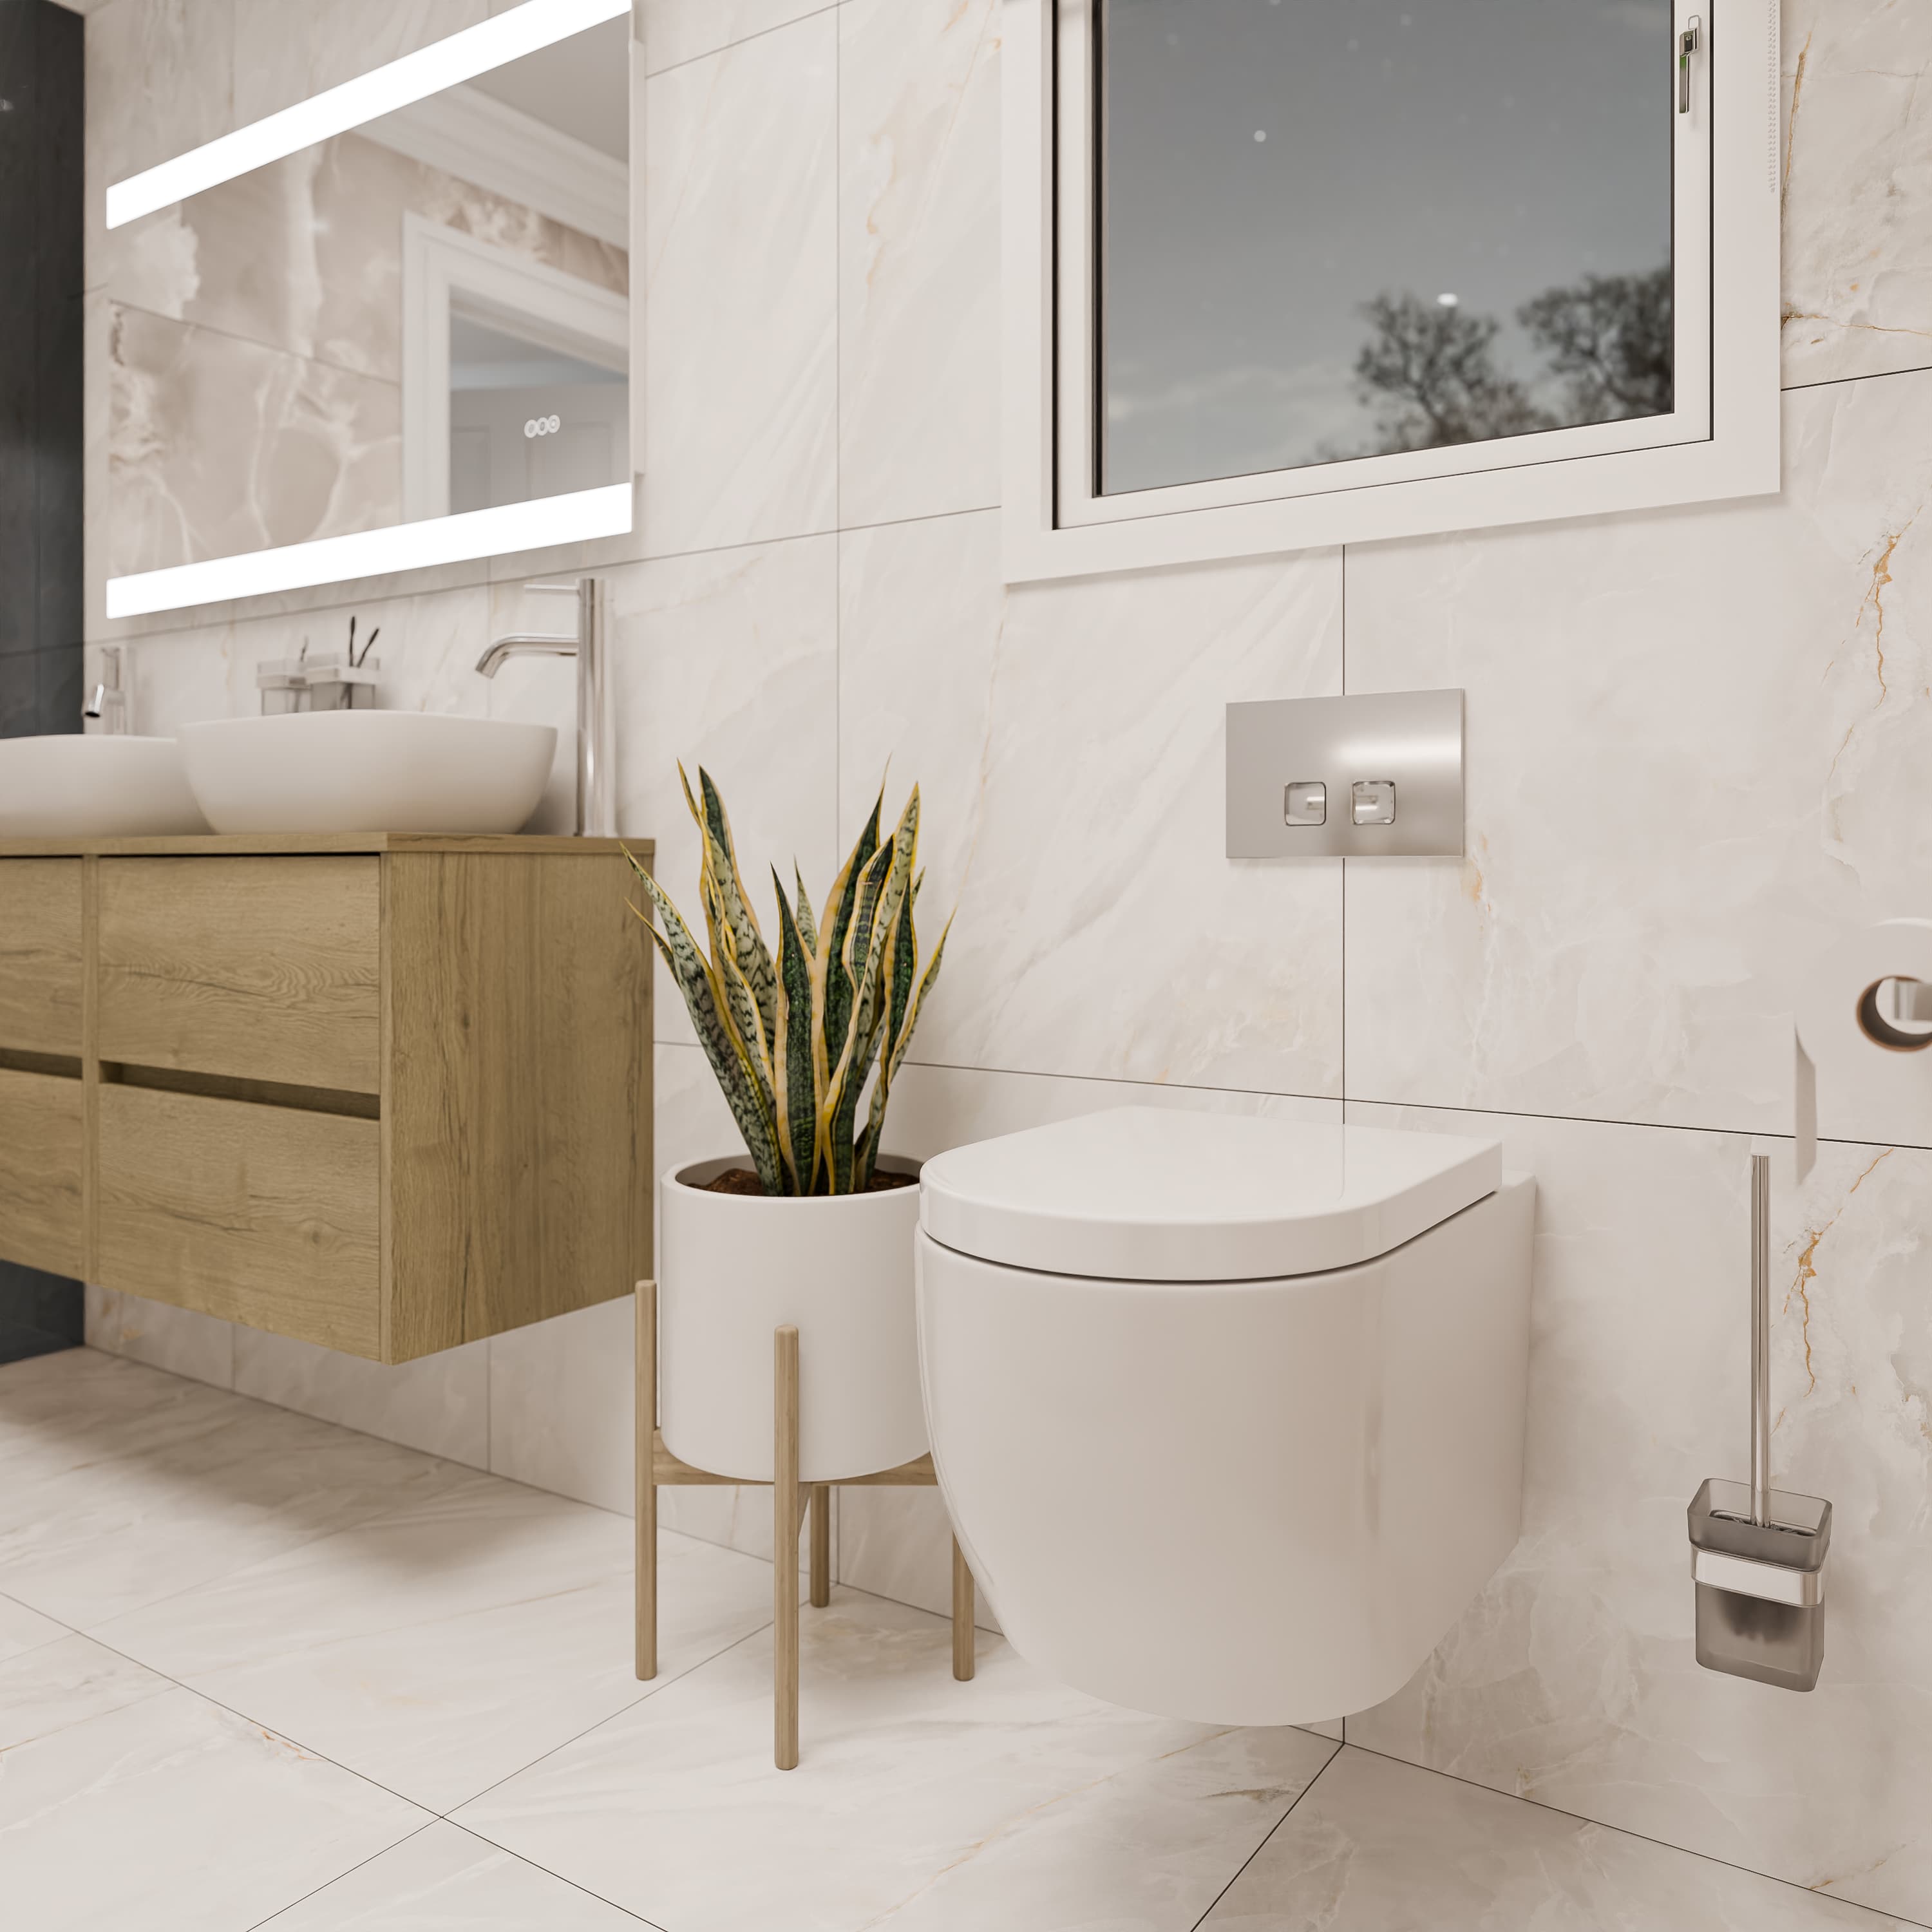 Neutral bathroom suite with wall hung toilet, chrome fixtures and greenery